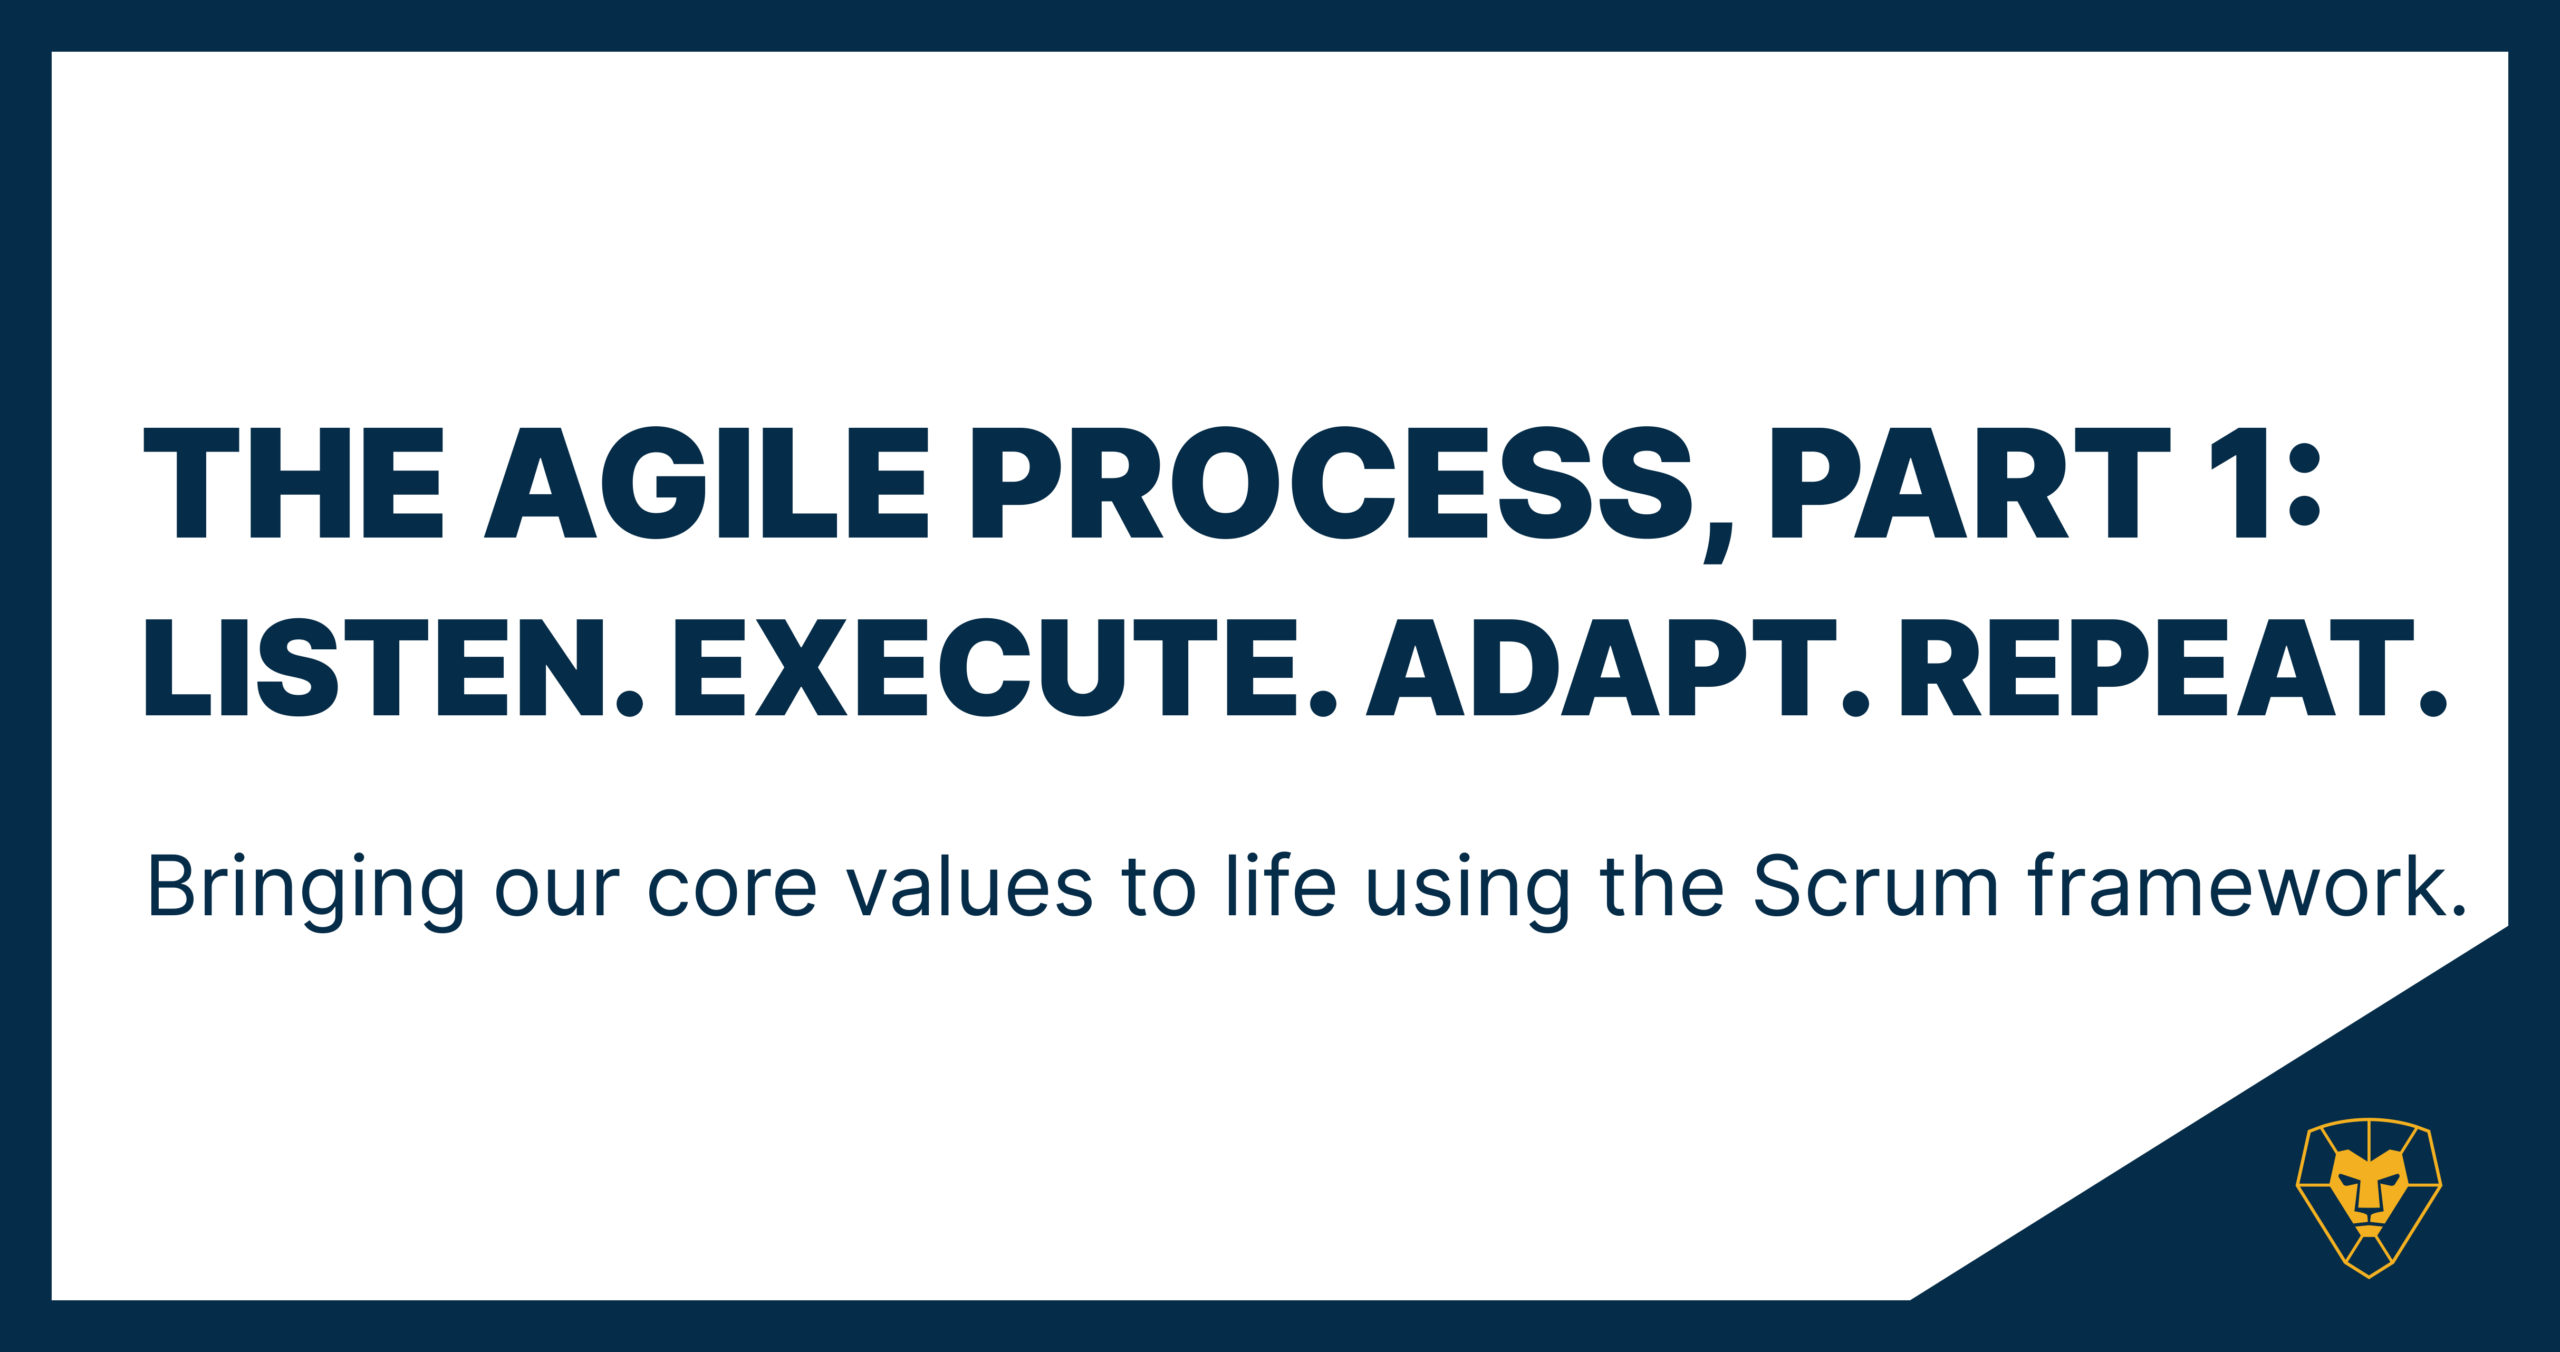 The Agile Process, Part 1: Listen Execute Adapt Repeat